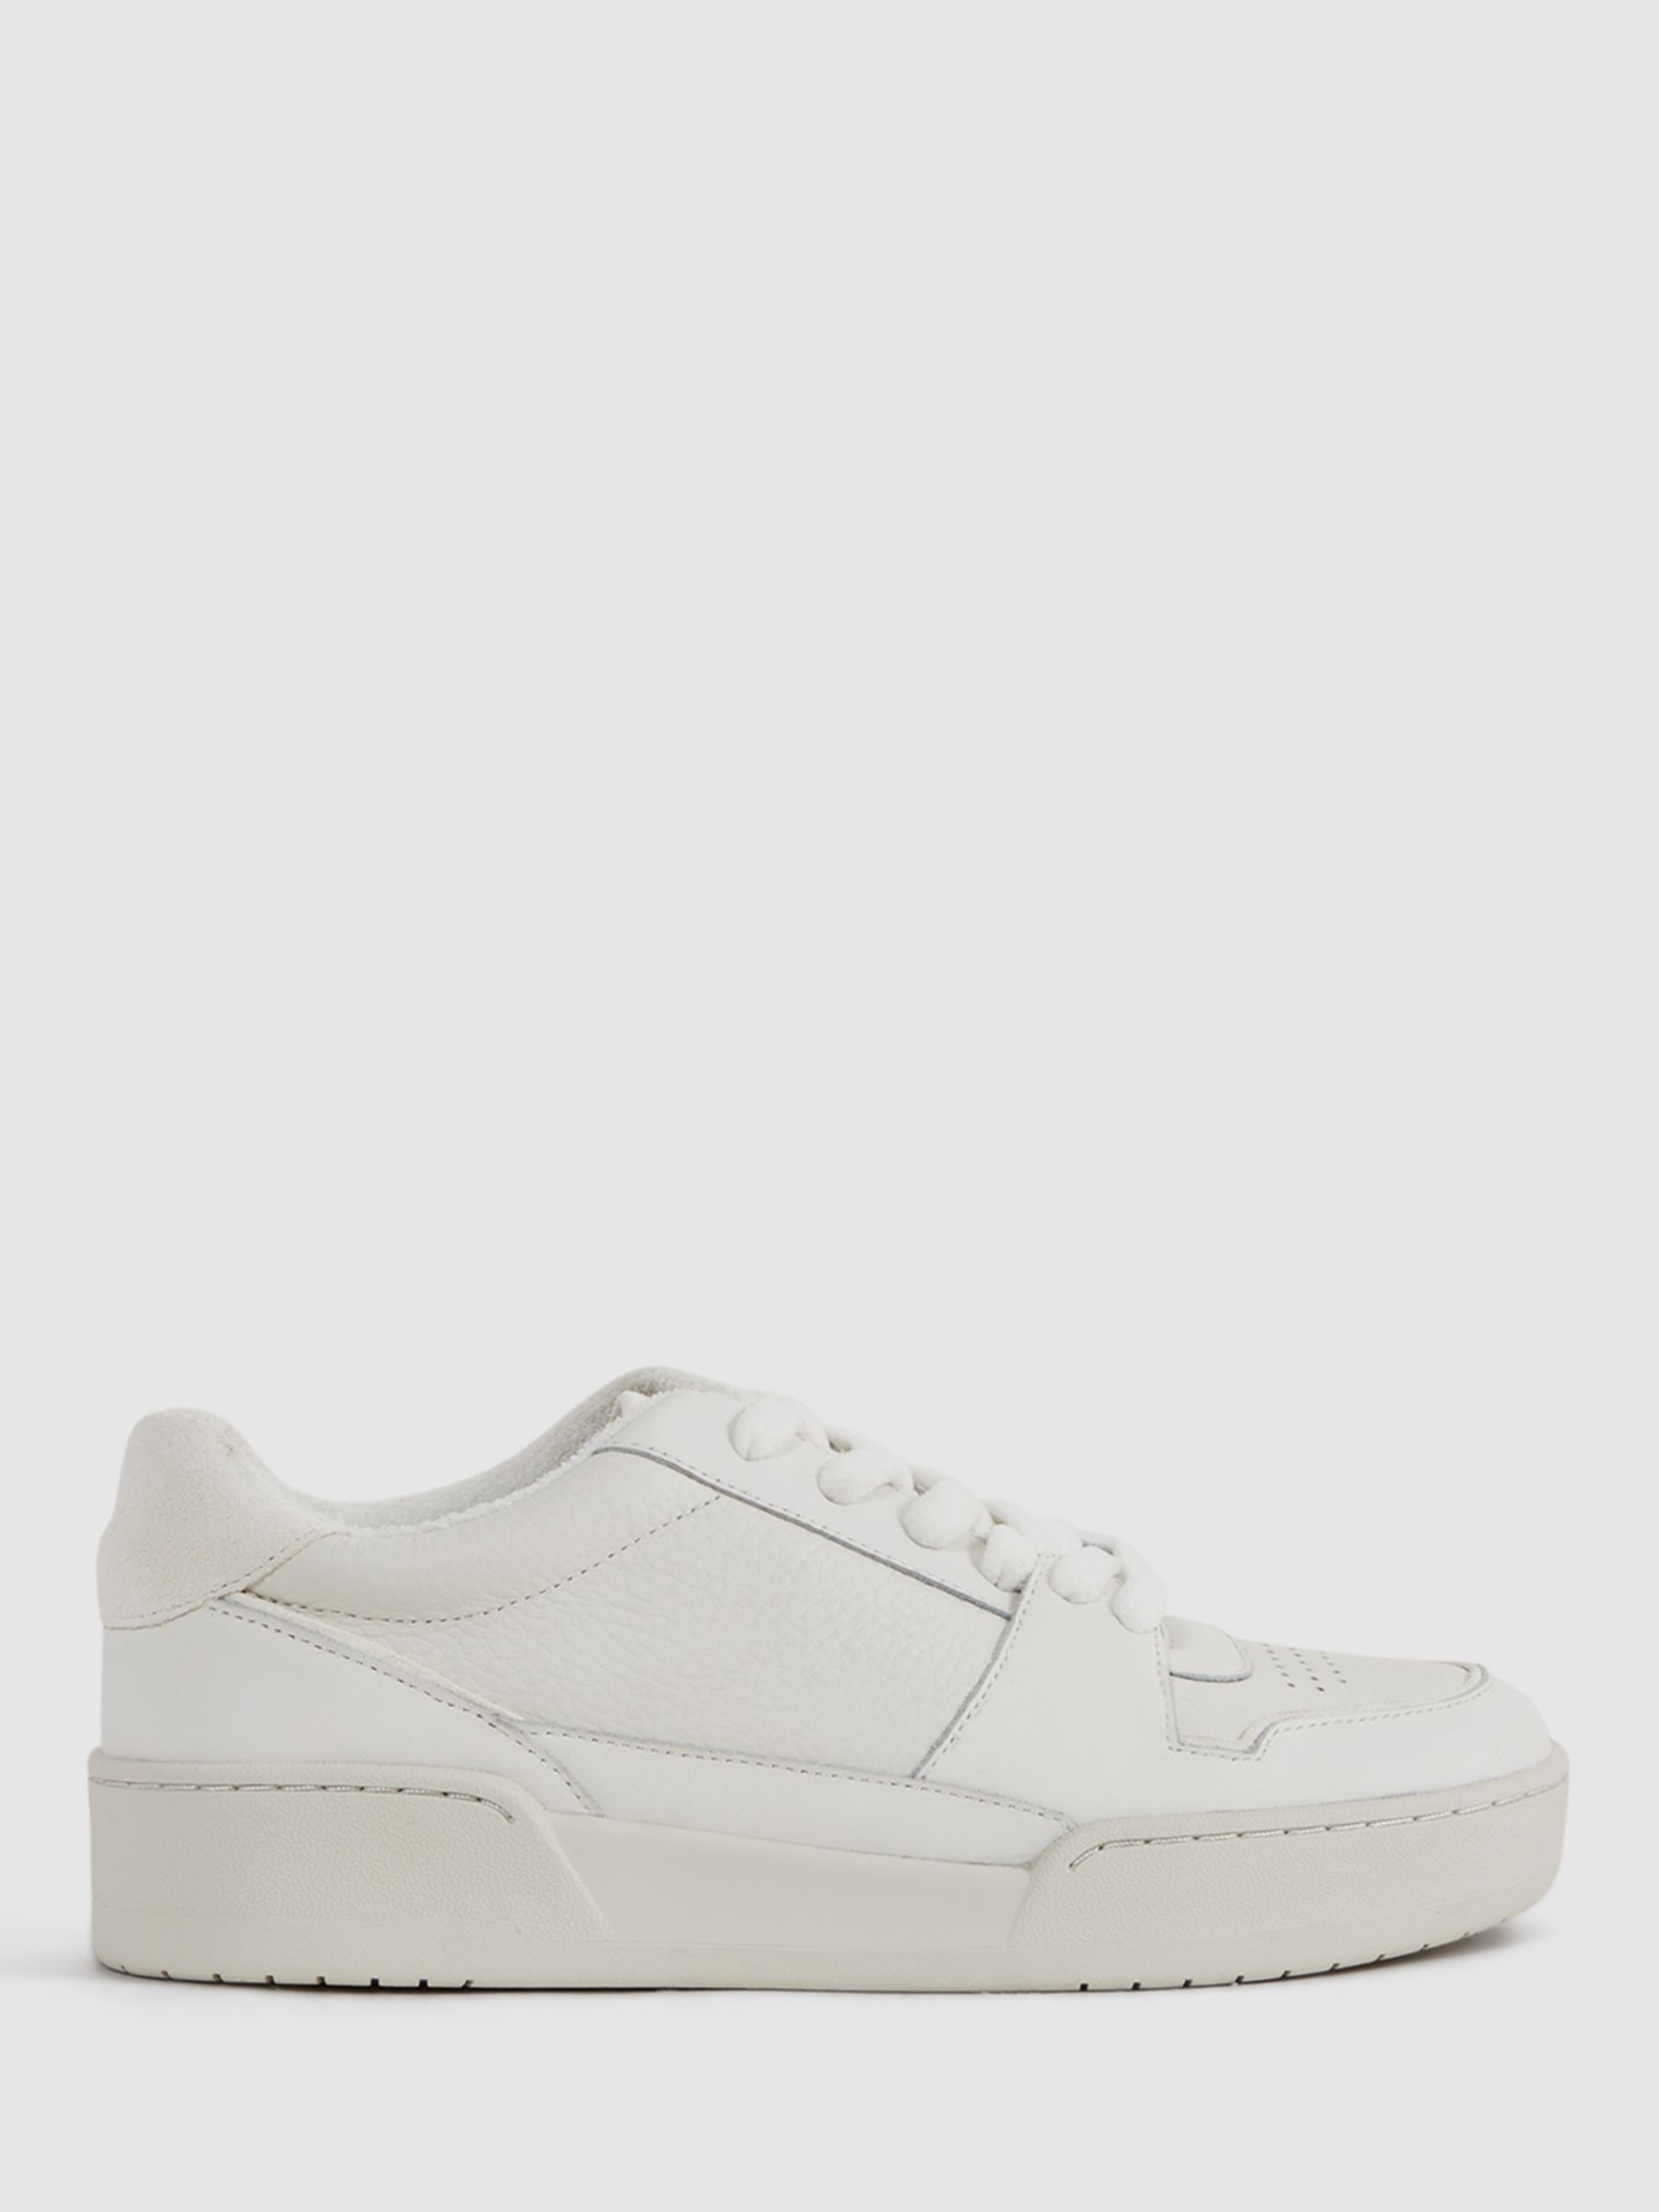 Reiss Frankie Leather Trainers, White at John Lewis & Partners